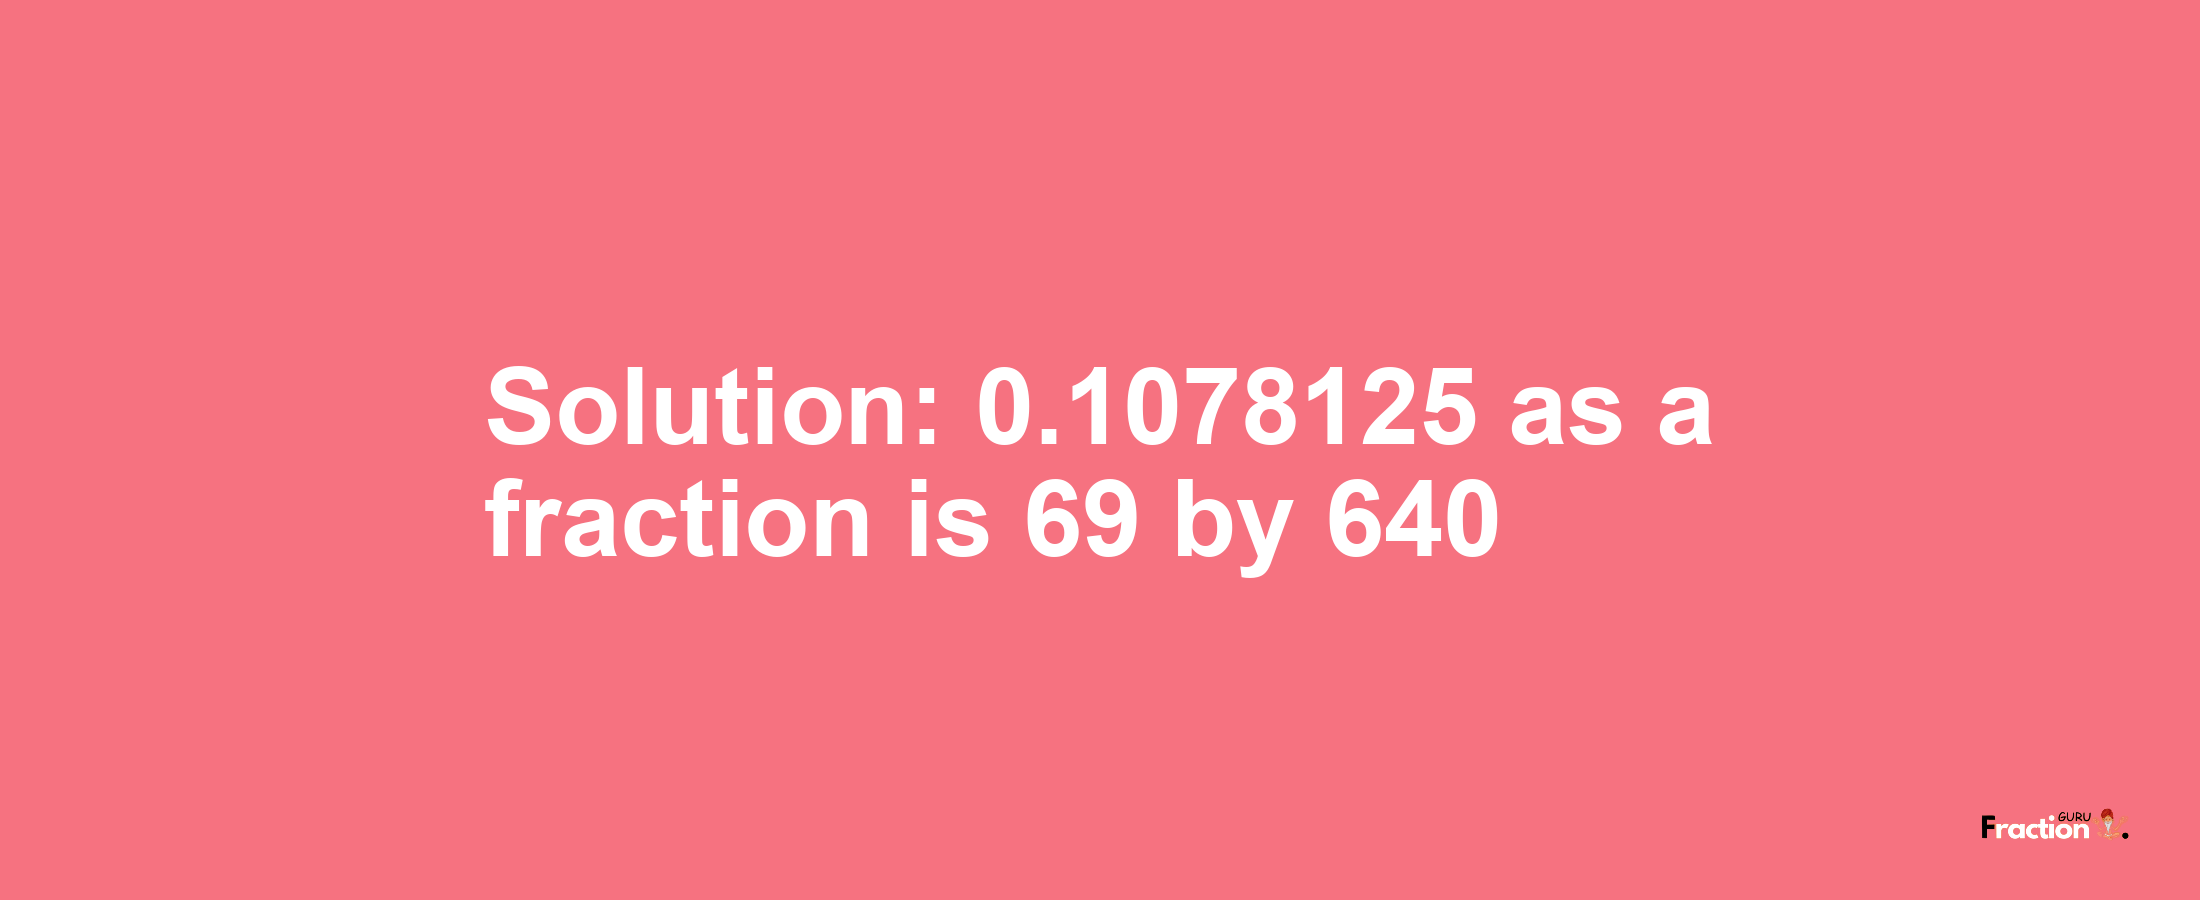 Solution:0.1078125 as a fraction is 69/640